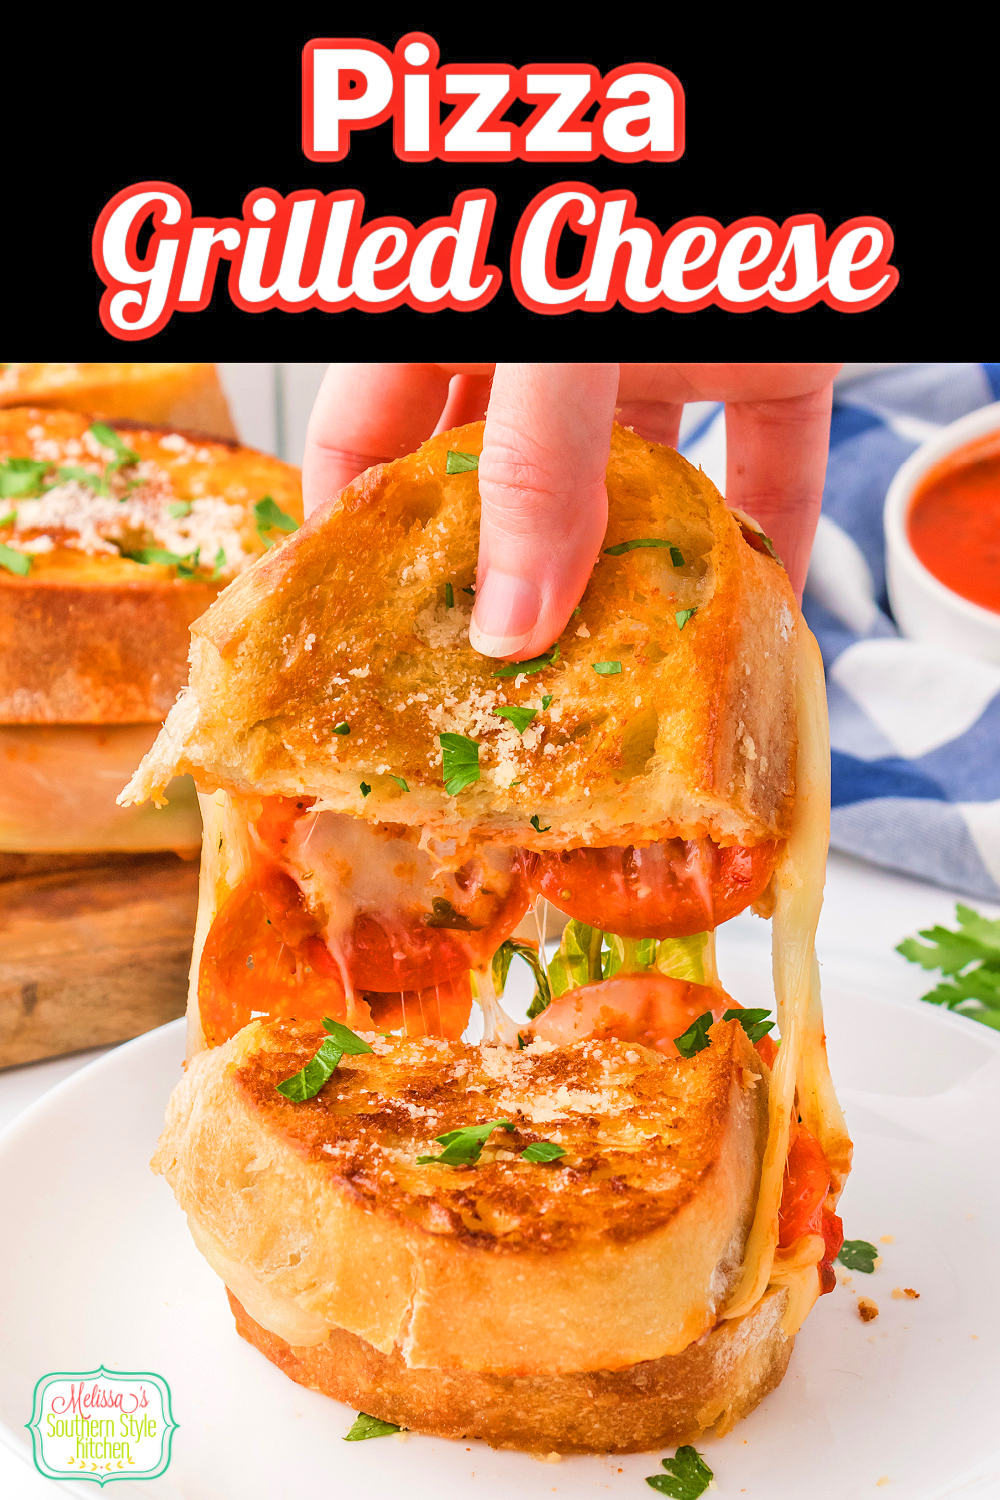 This Pizza Grilled Cheese recipe features an unexpected layer of romaine that adds crunch and texture to complete the flavor profile #pizzarecipes #pepperonipizza #pizzagrilledcheese #grilledcheese #grilledcheeserecipe #easygrilledcheeserecipes #pizzagrilled cheese via @melissasssk